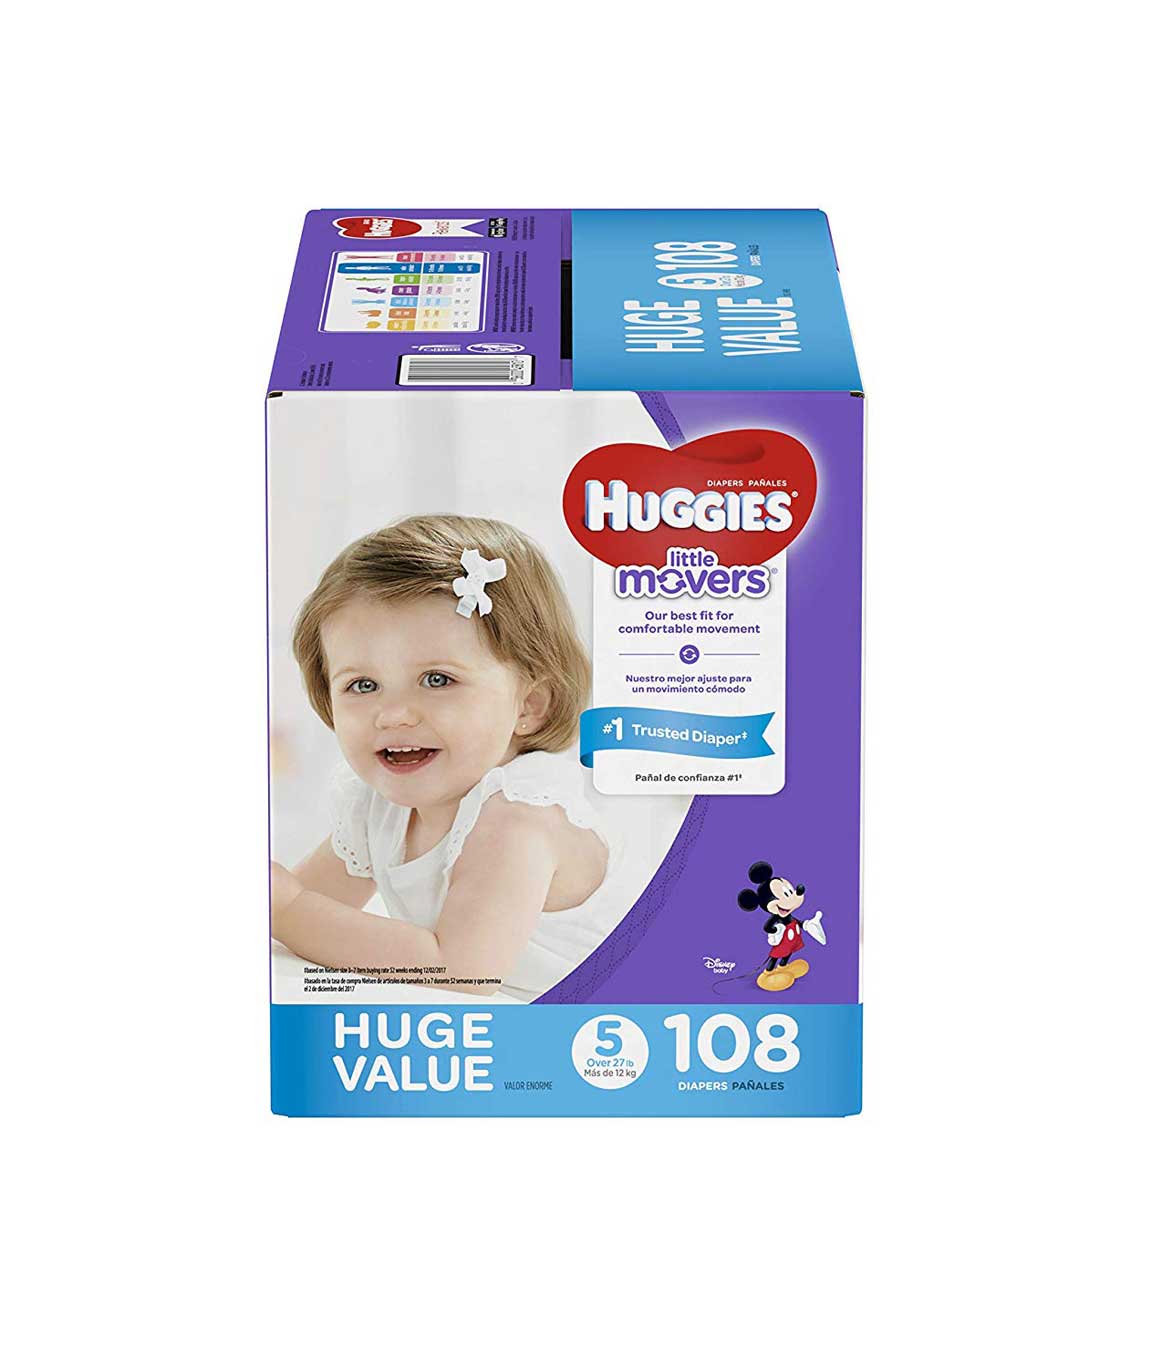  Huggies Little Movers Diapers, Size 7 : Baby